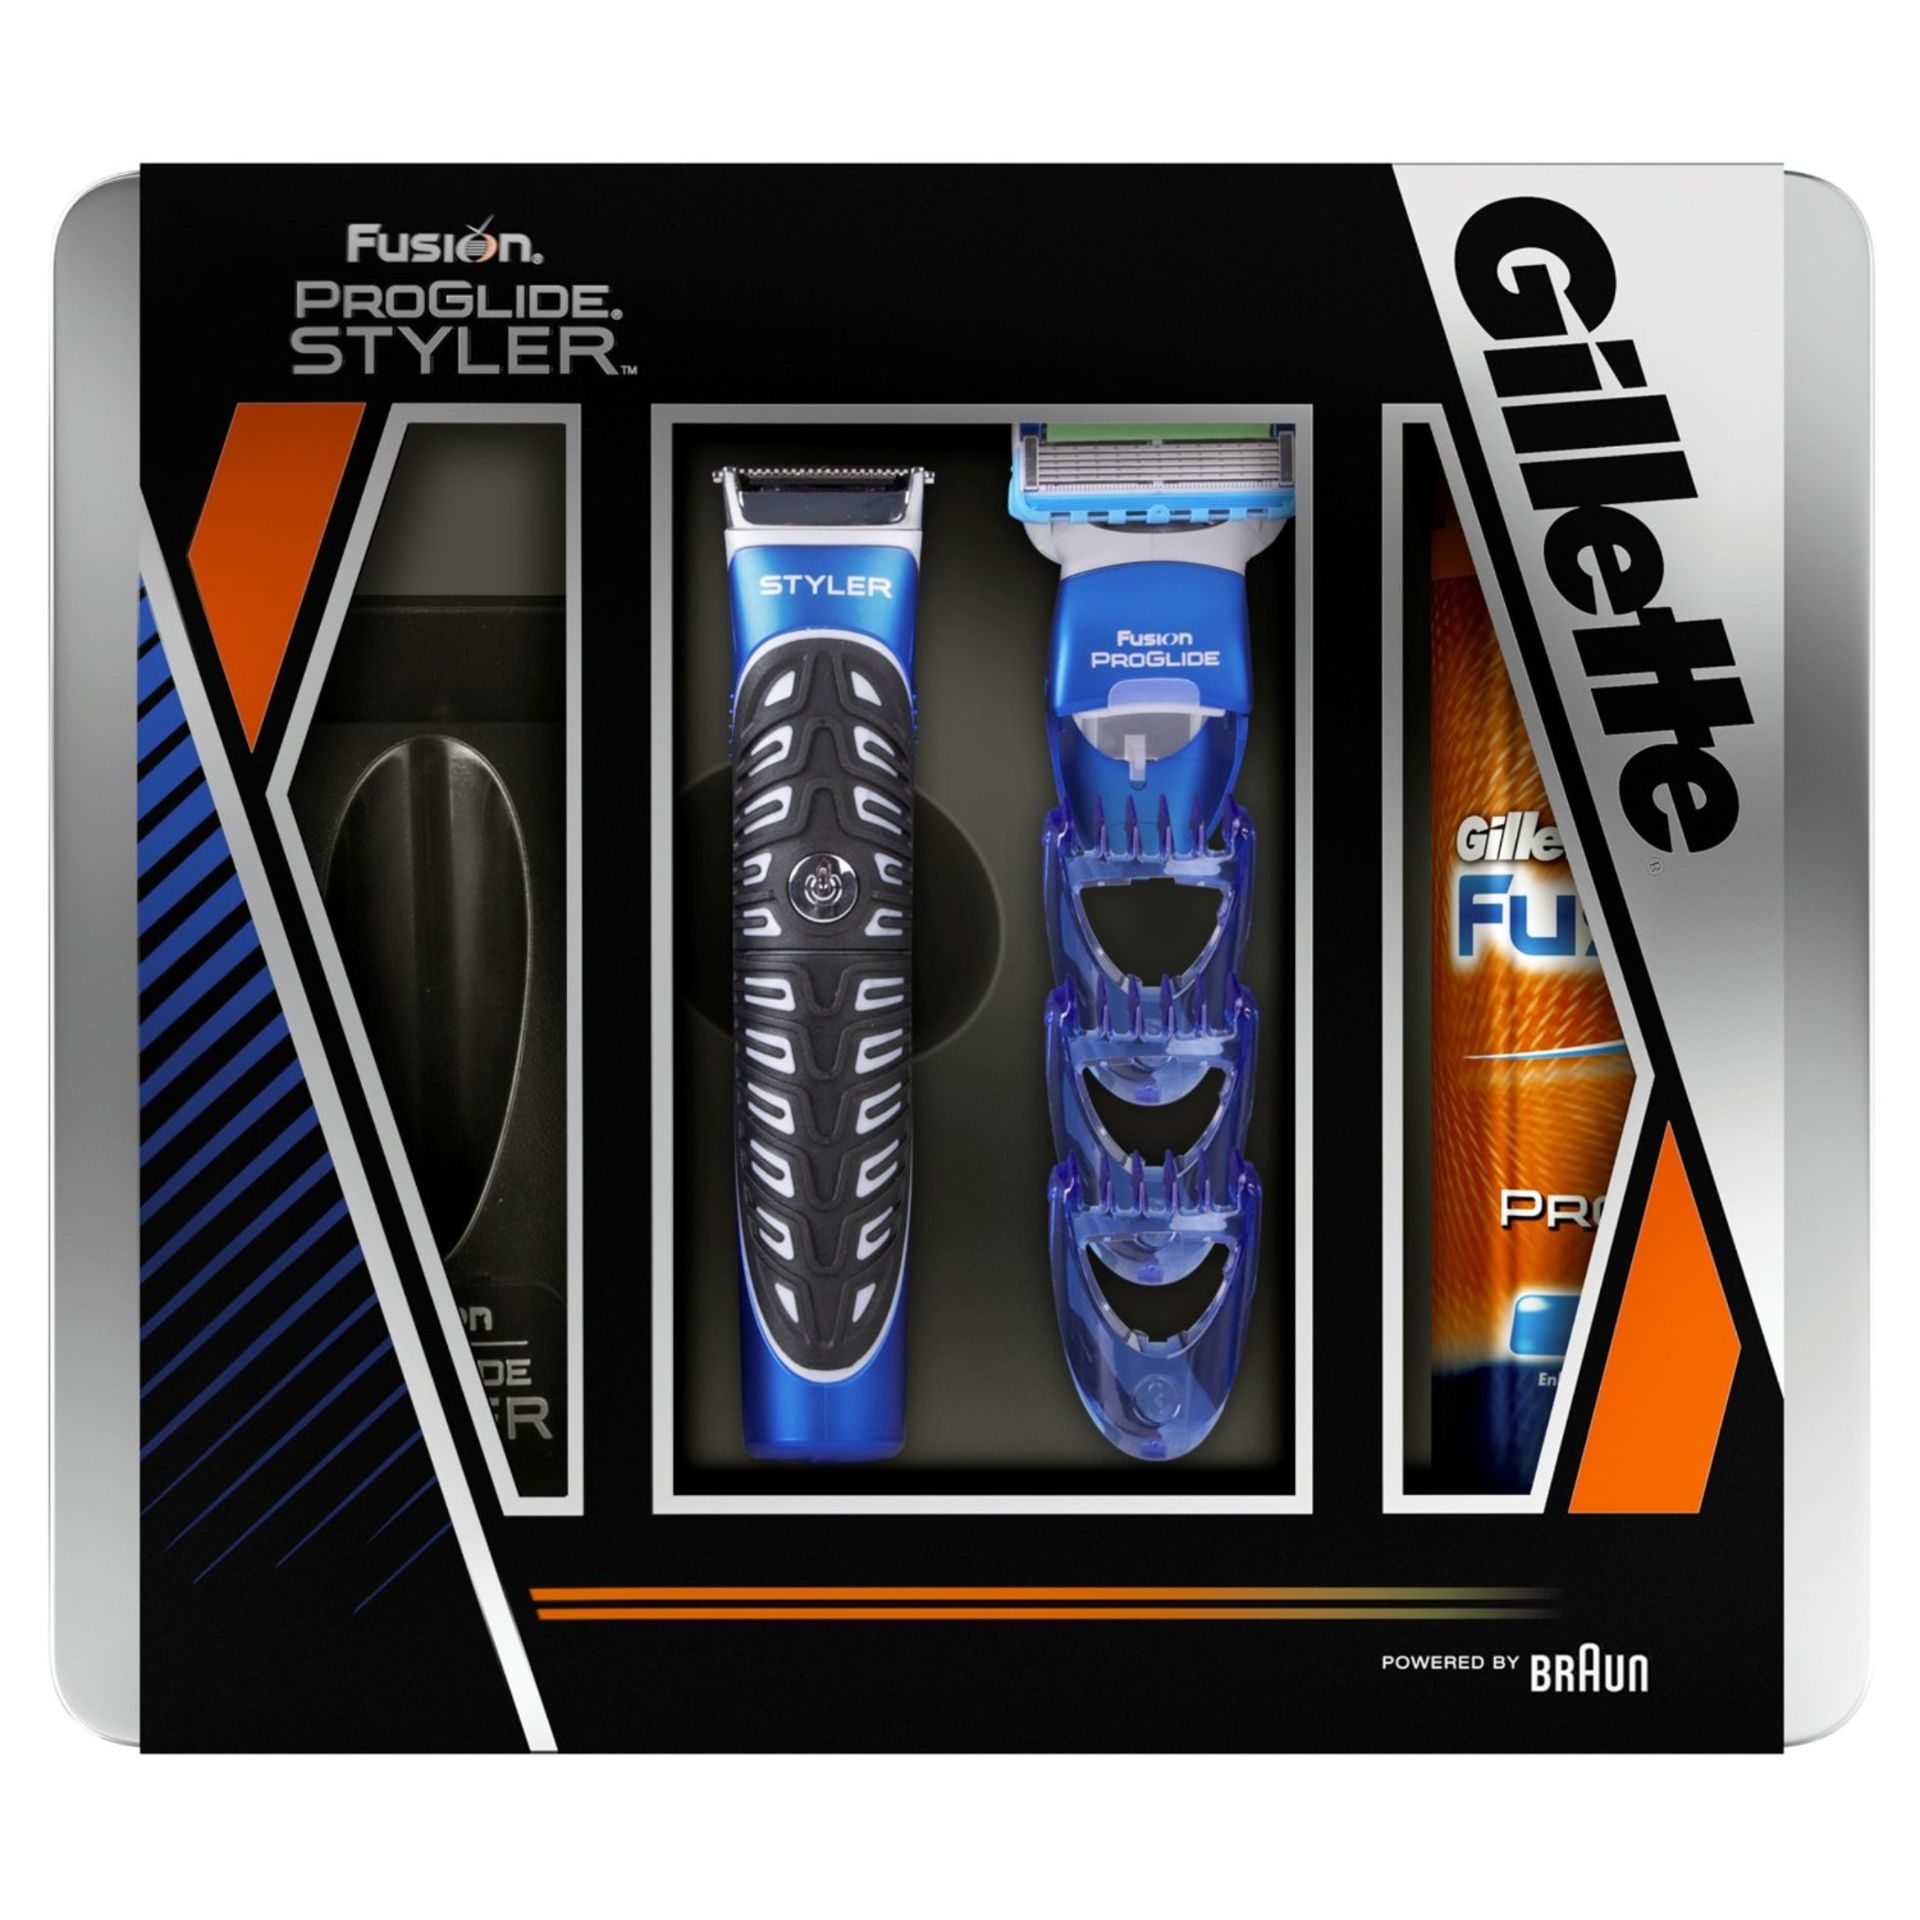 V Brand New Gillette Styler Plus Razor Plus Hydrating Set X 2 YOUR BID PRICE TO BE MULTIPLIED BY